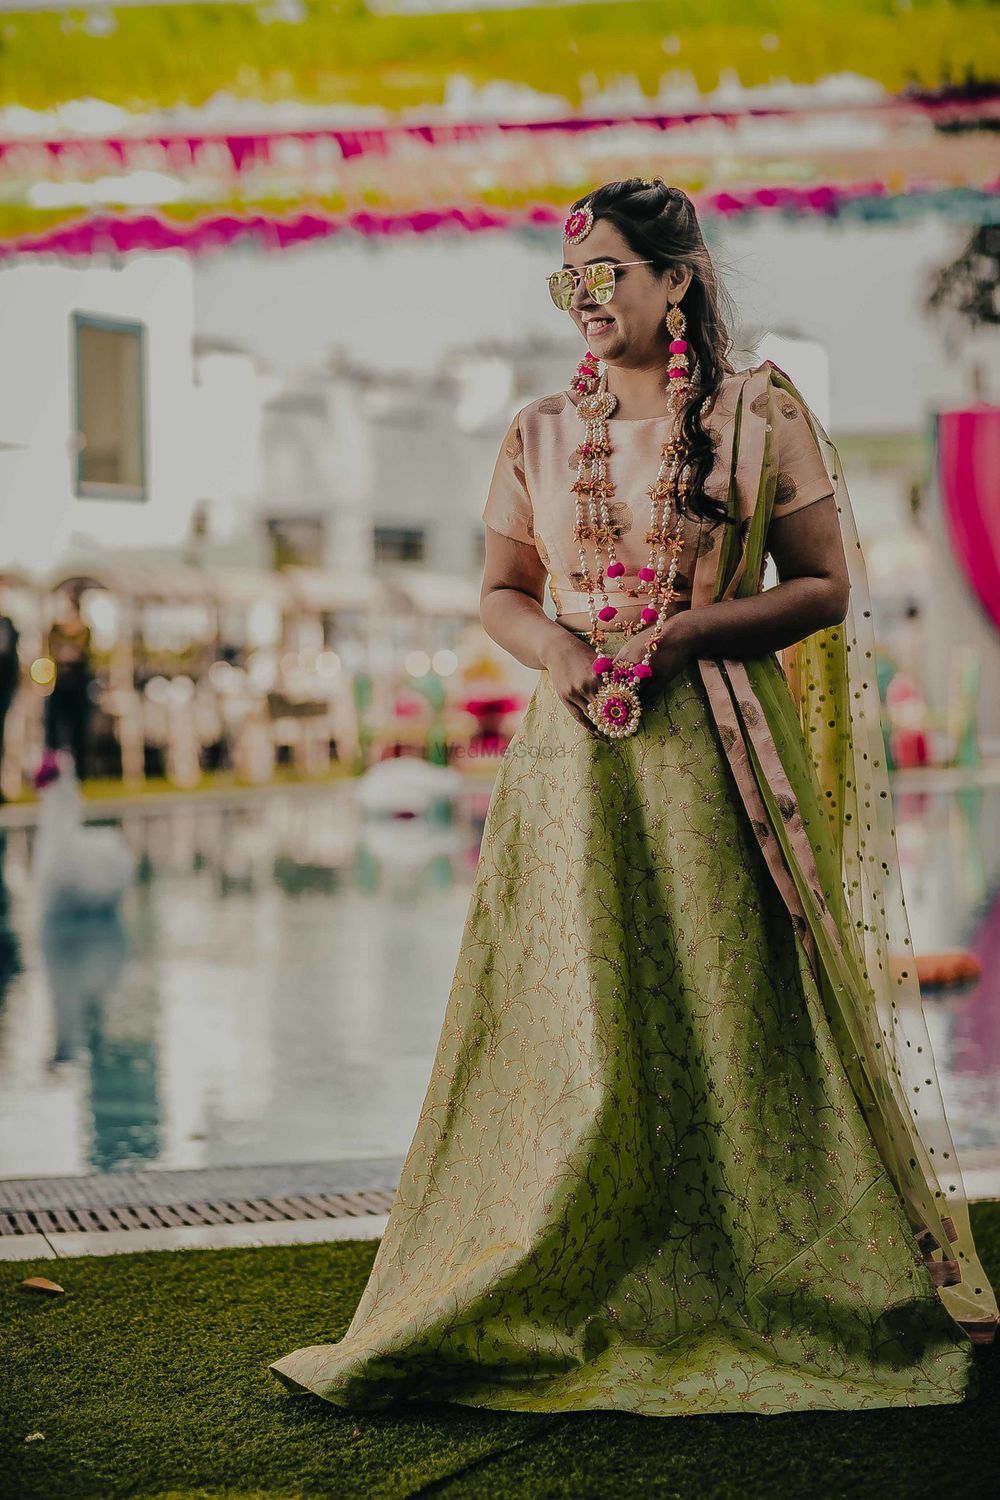 Photo of A bride-to-be in a green lehenga and pink floral jewellery for her mehndi